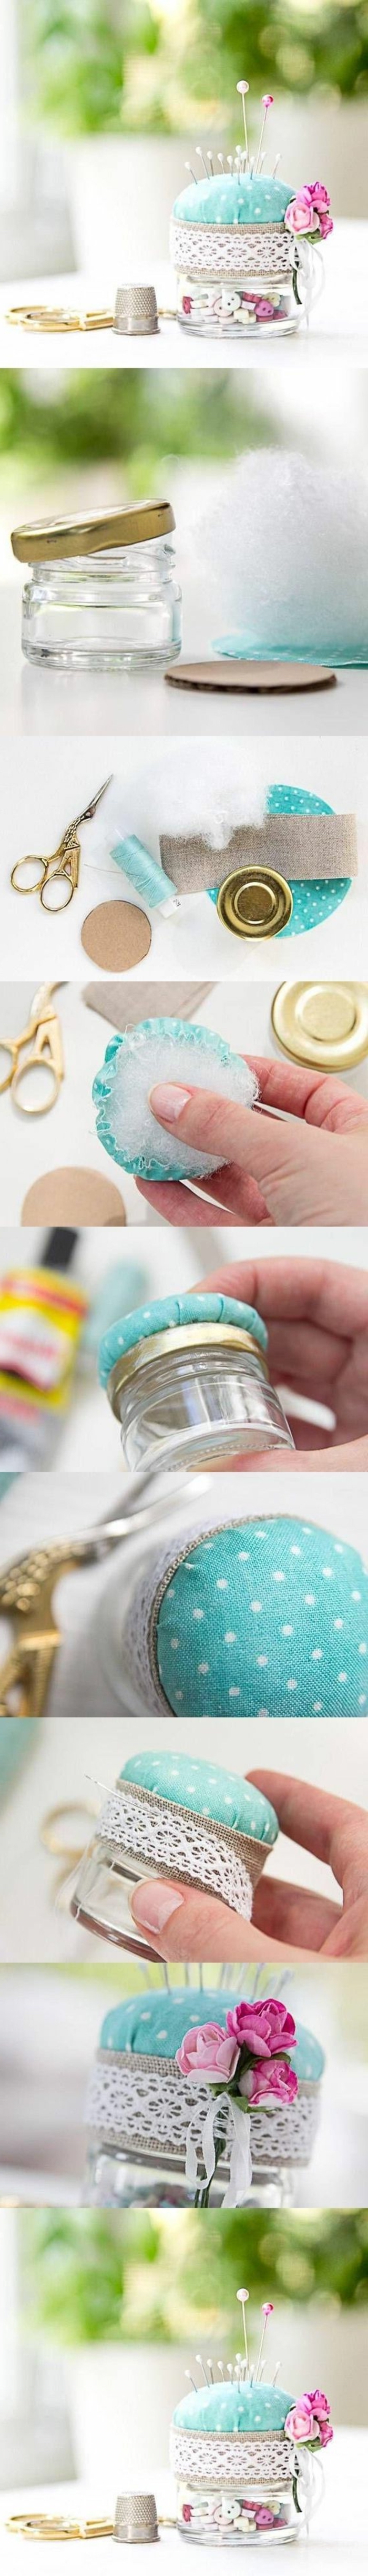 diy tutorial, step by step, fun easy crafts, pins and needles pillow, small jar